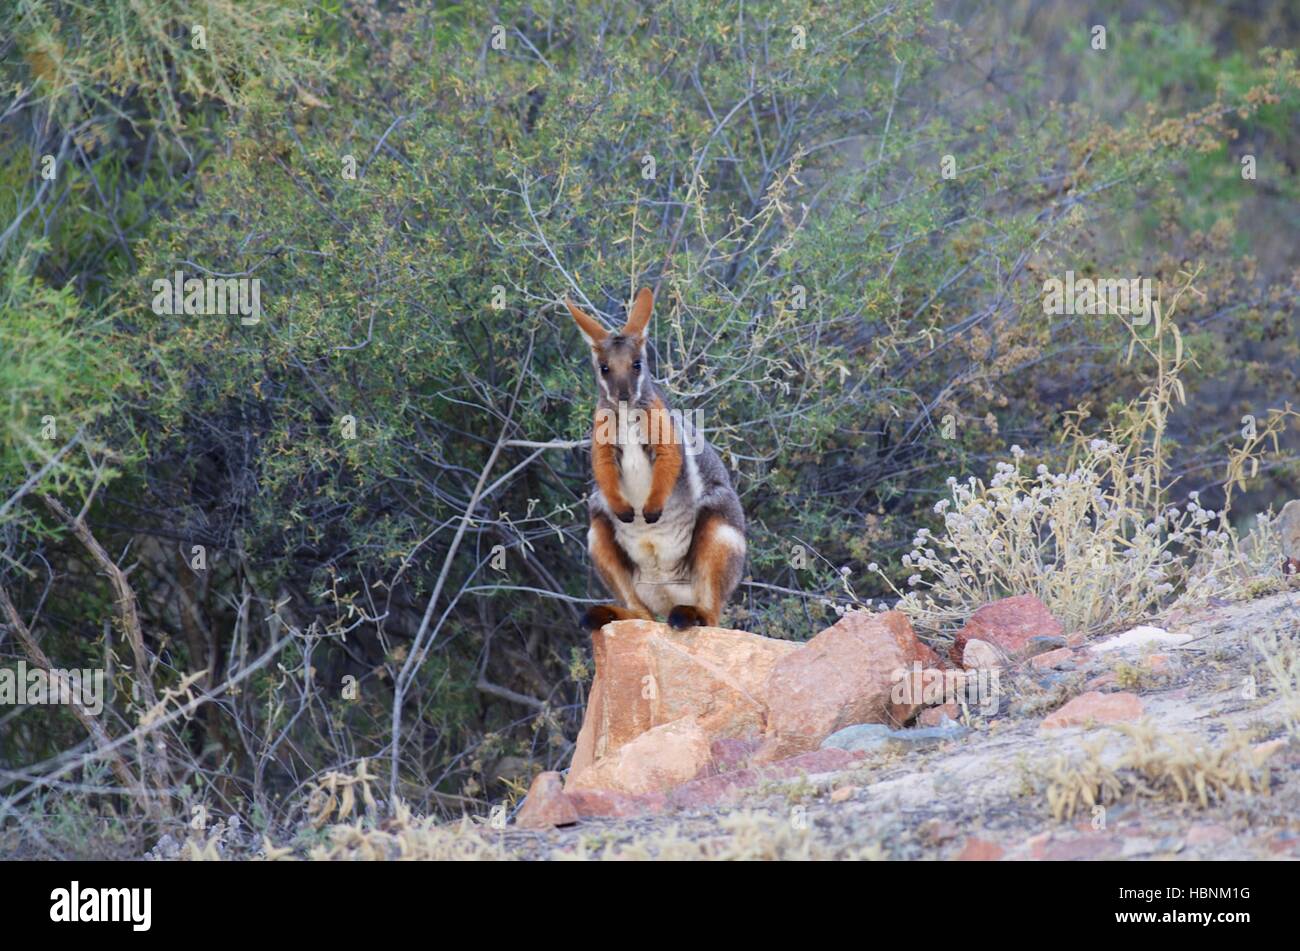 A Yellow-footed Rock Wallaby (Petrogale xanthopus) along a road clearing in Arkaroola Wilderness Sanctuary, South Australia Stock Photo